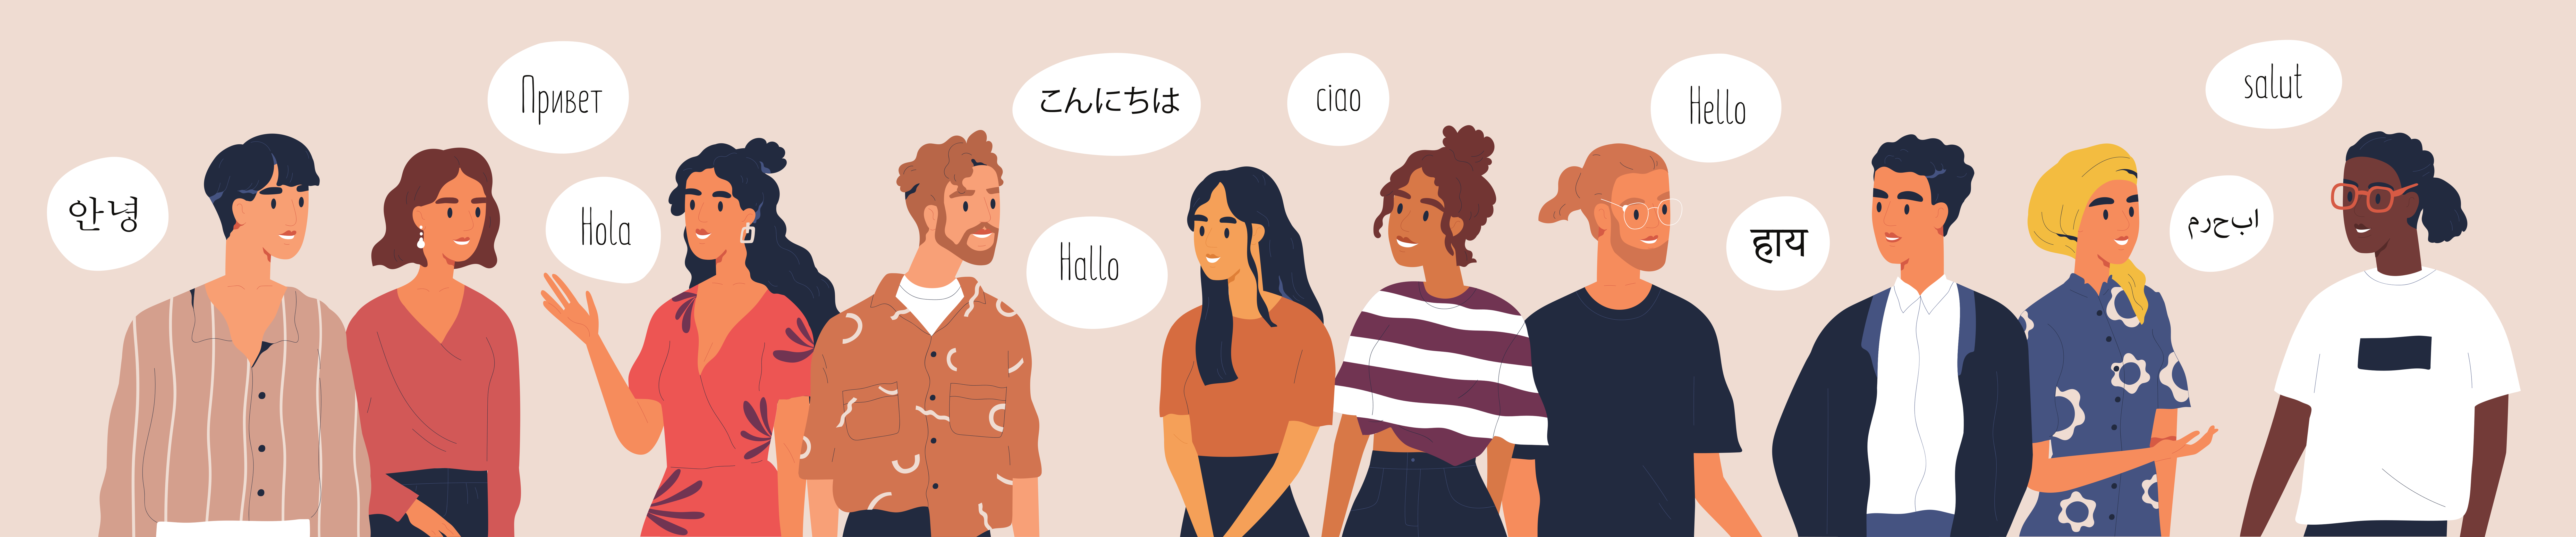 illustration of 10 men and women saying hello in different languages